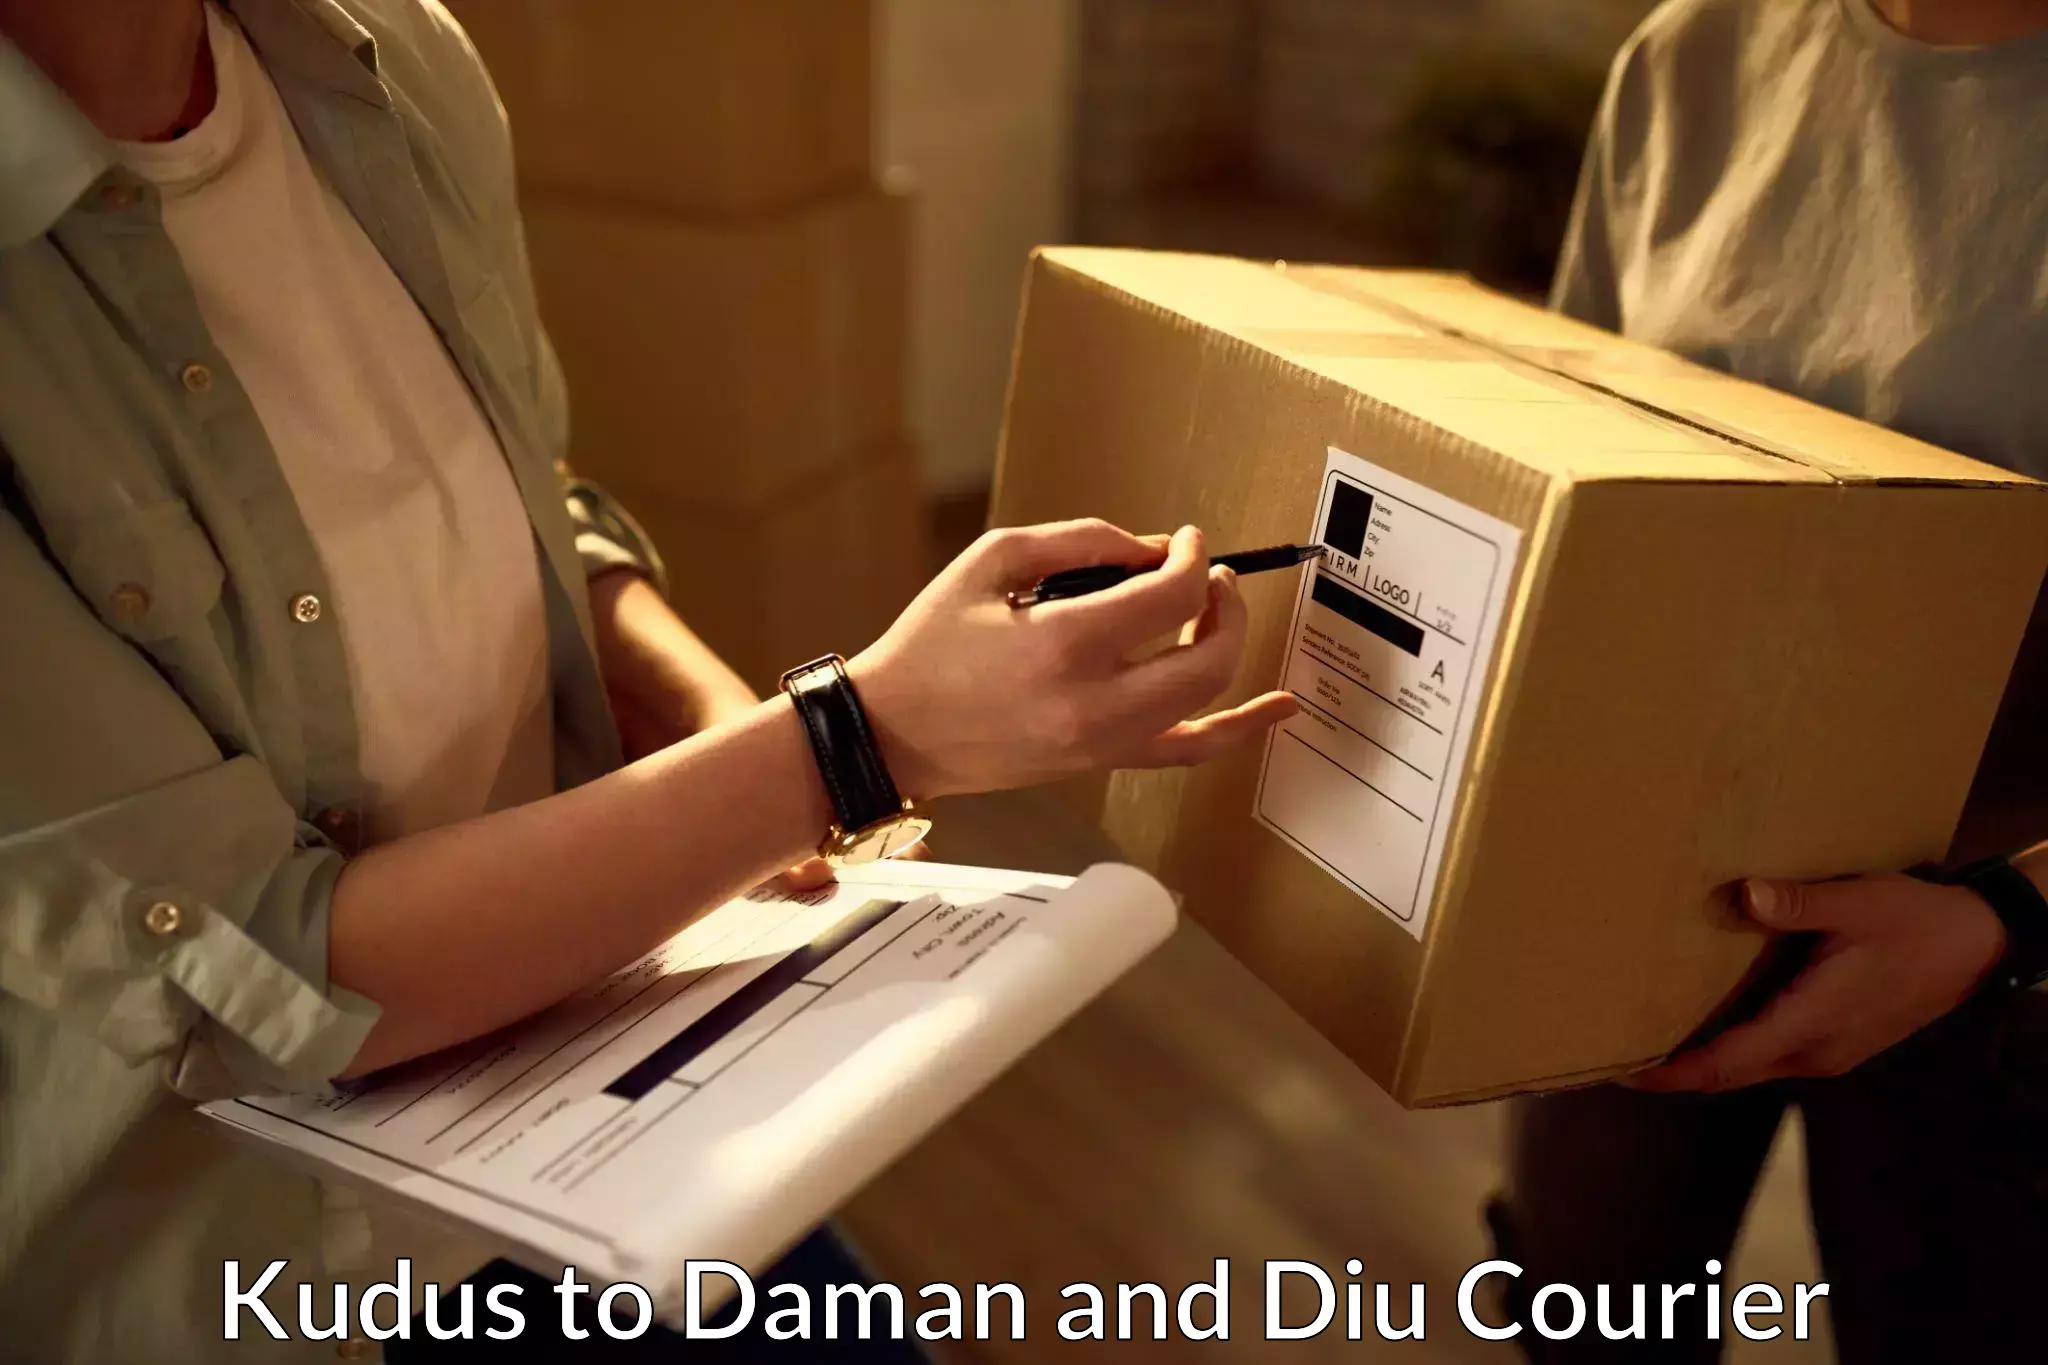 Efficient package consolidation Kudus to Daman